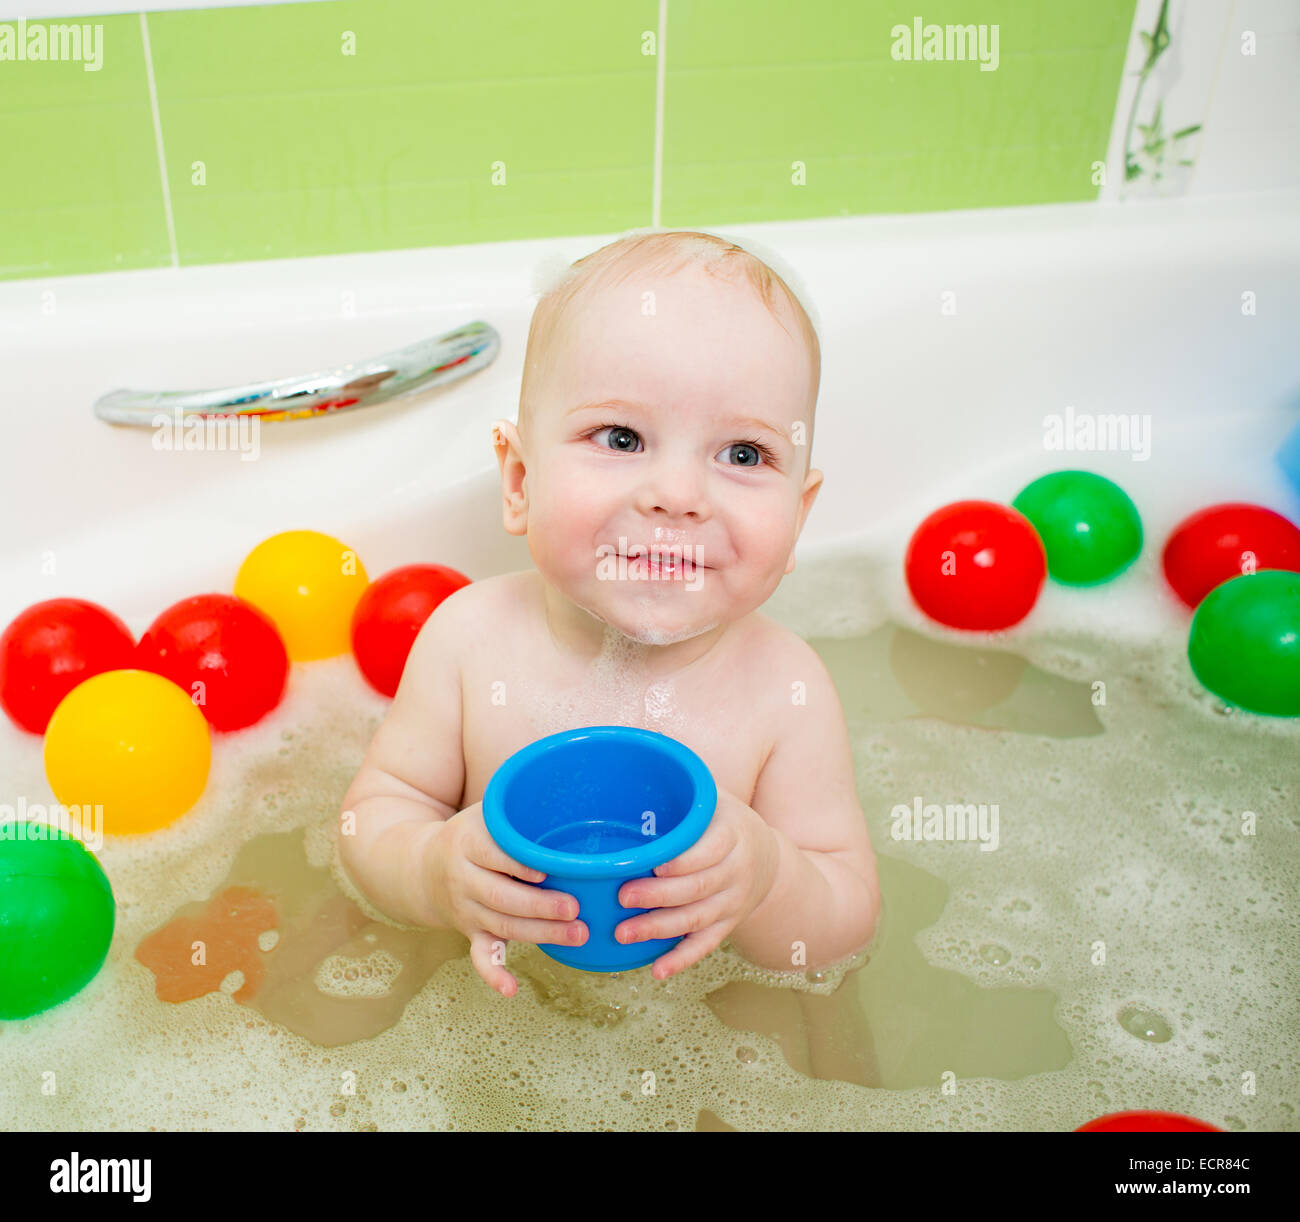 baby clapping hands and smiling while taking a bath Stock Photo